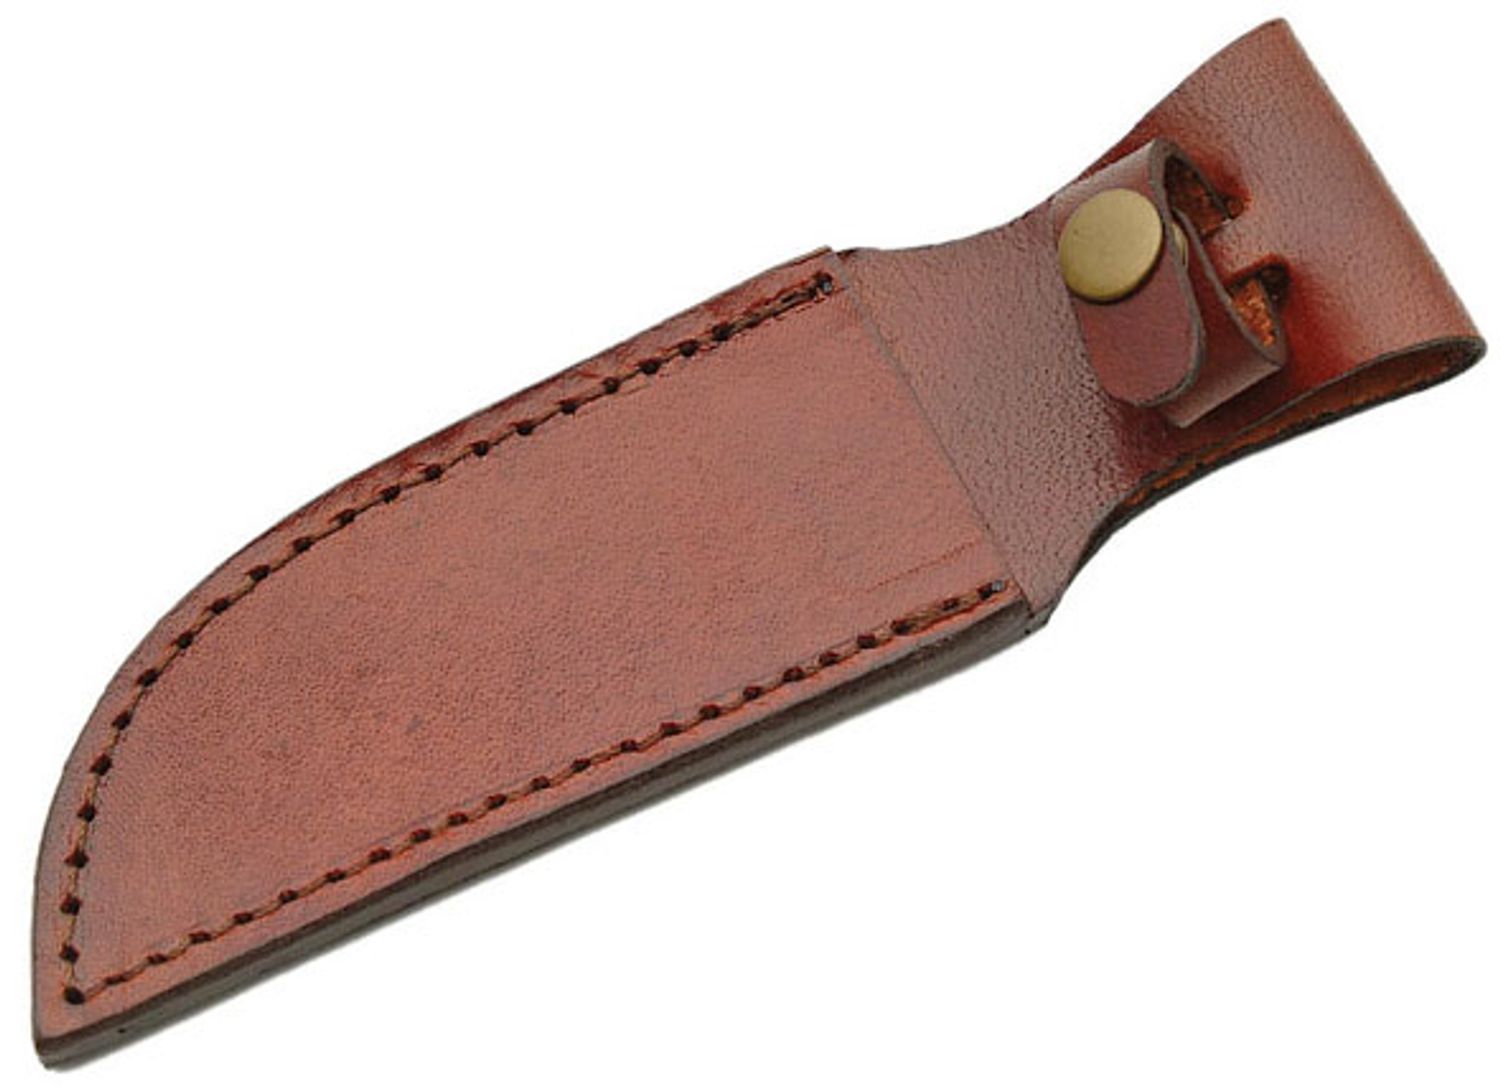 Brown Leather Sheath, Fits Most Fixed Blades Up to 5 - KnifeCenter - SH1161